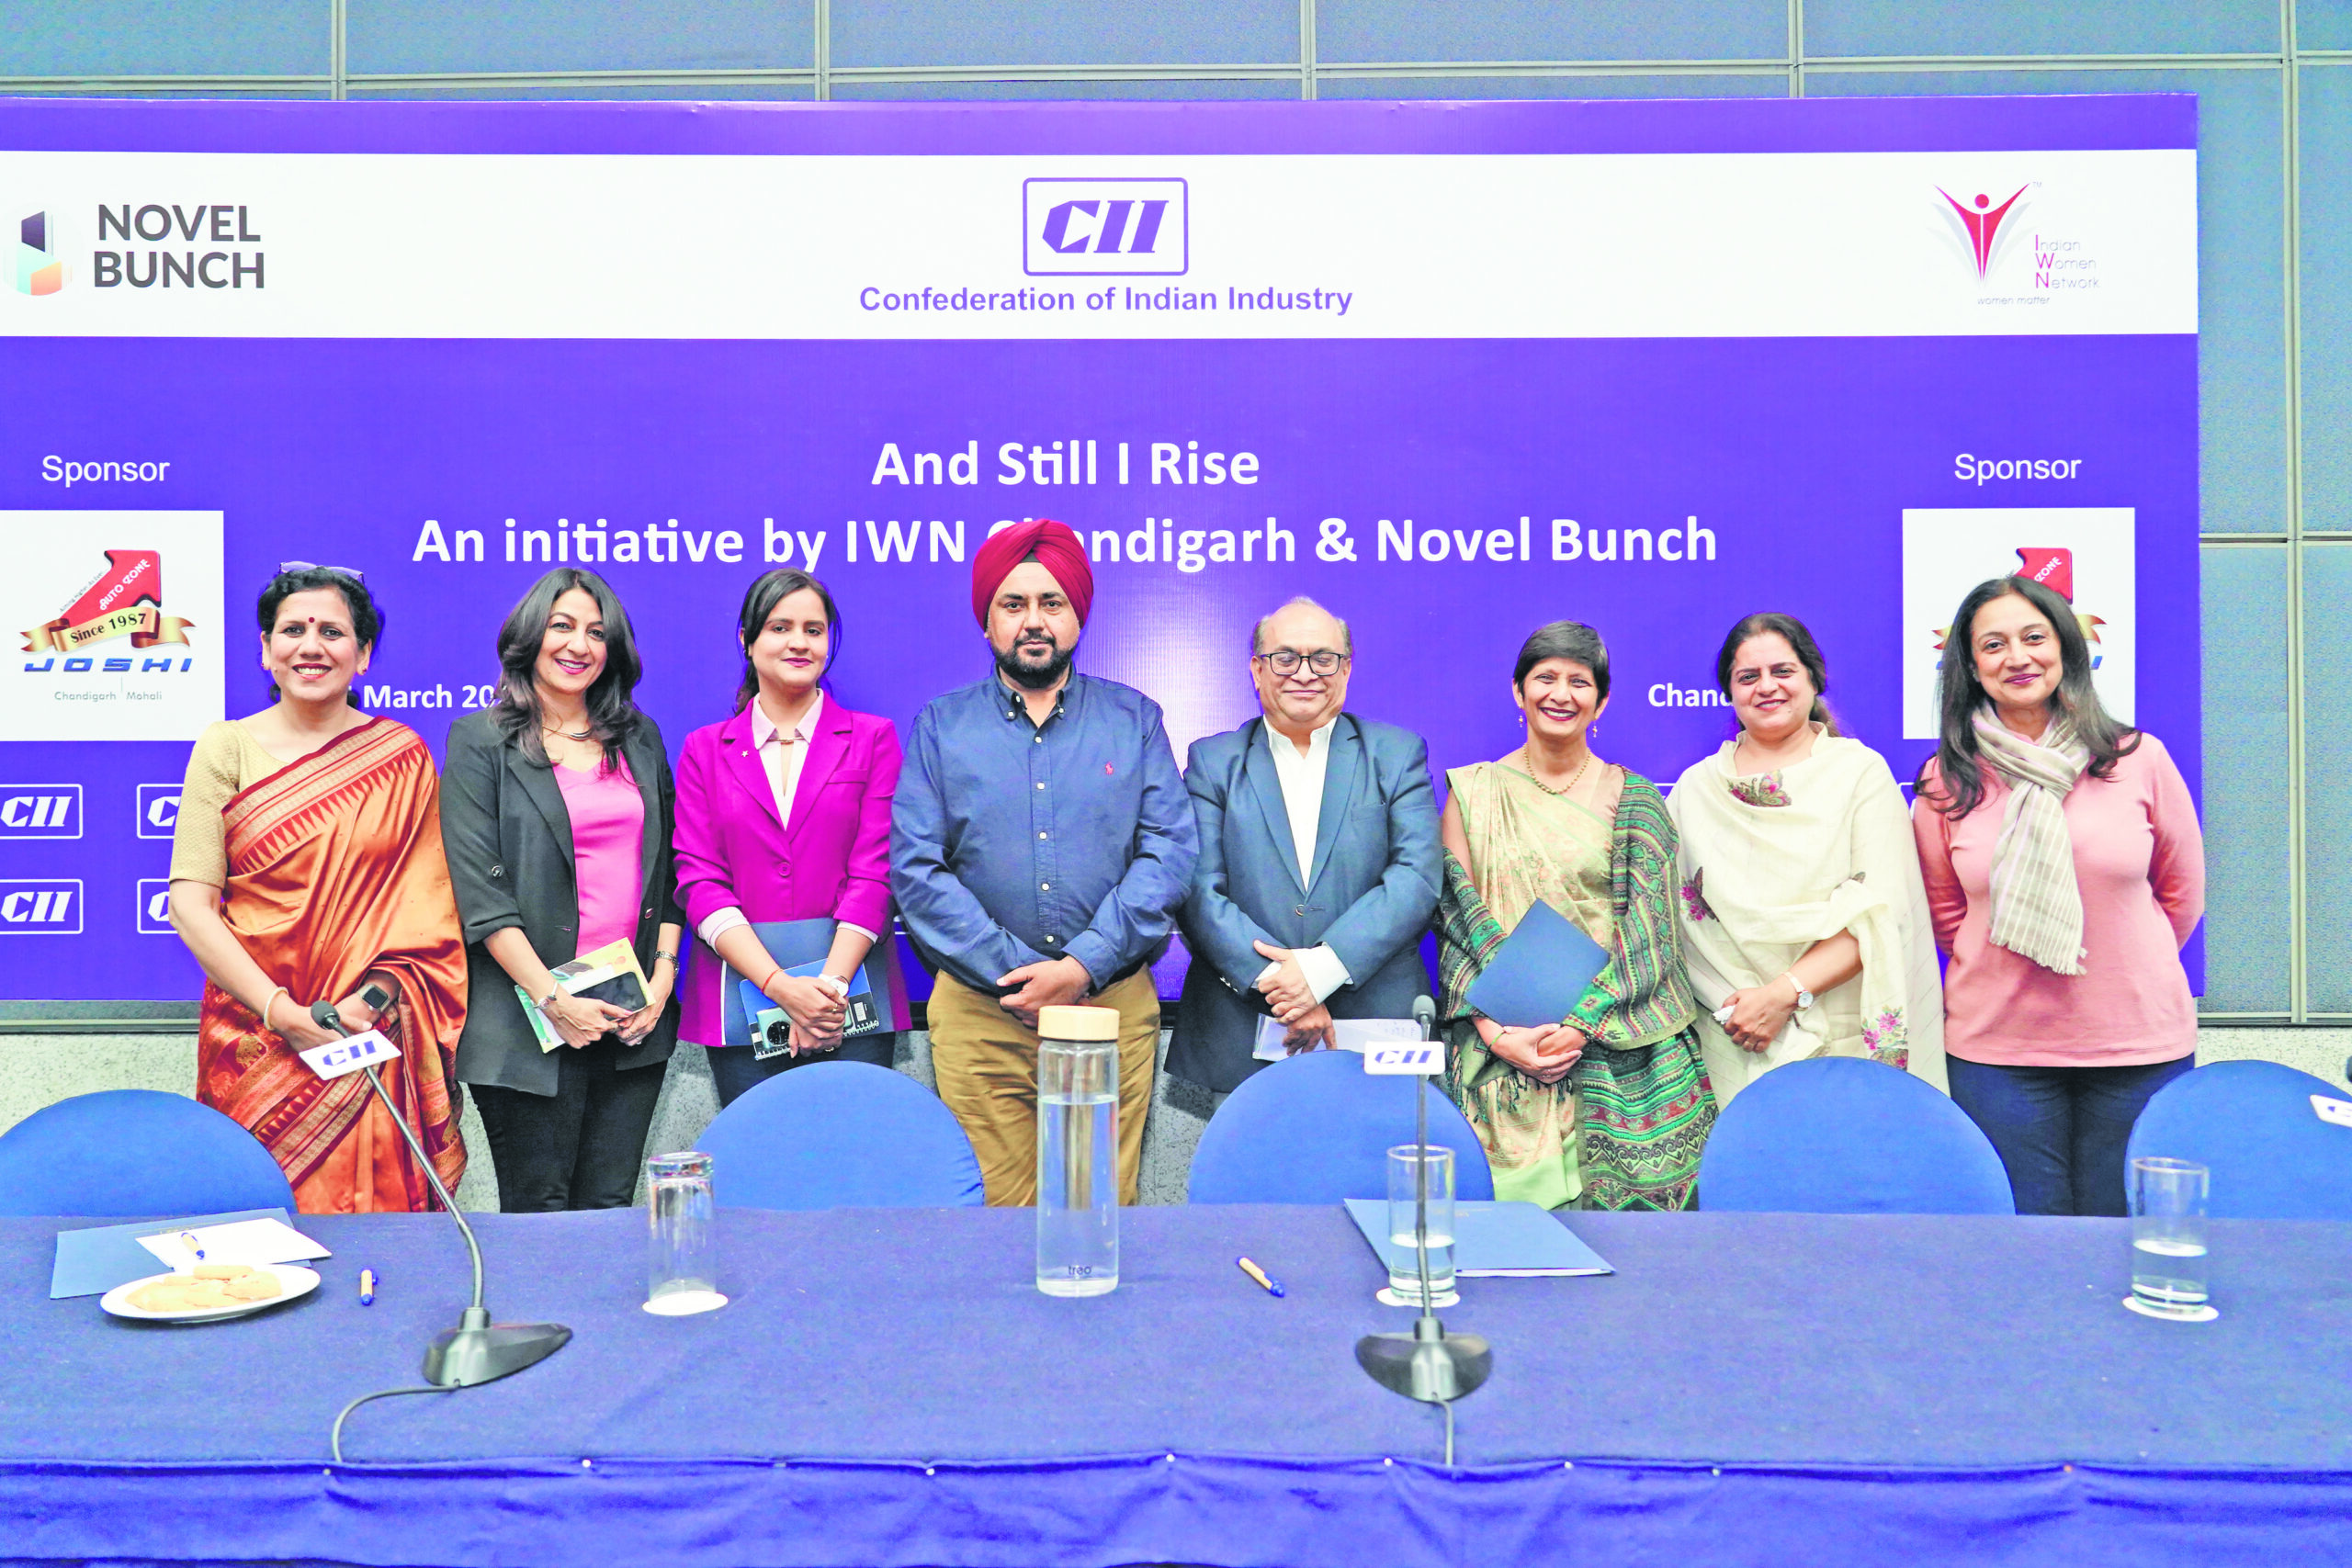 “AND STILL I RISE” EVENT BY IWN CHANDIGARH CHAPTER AND NOVEL BUNCH CELEBRATES WOMEN EMPOWERMENT AND RESILIENCE